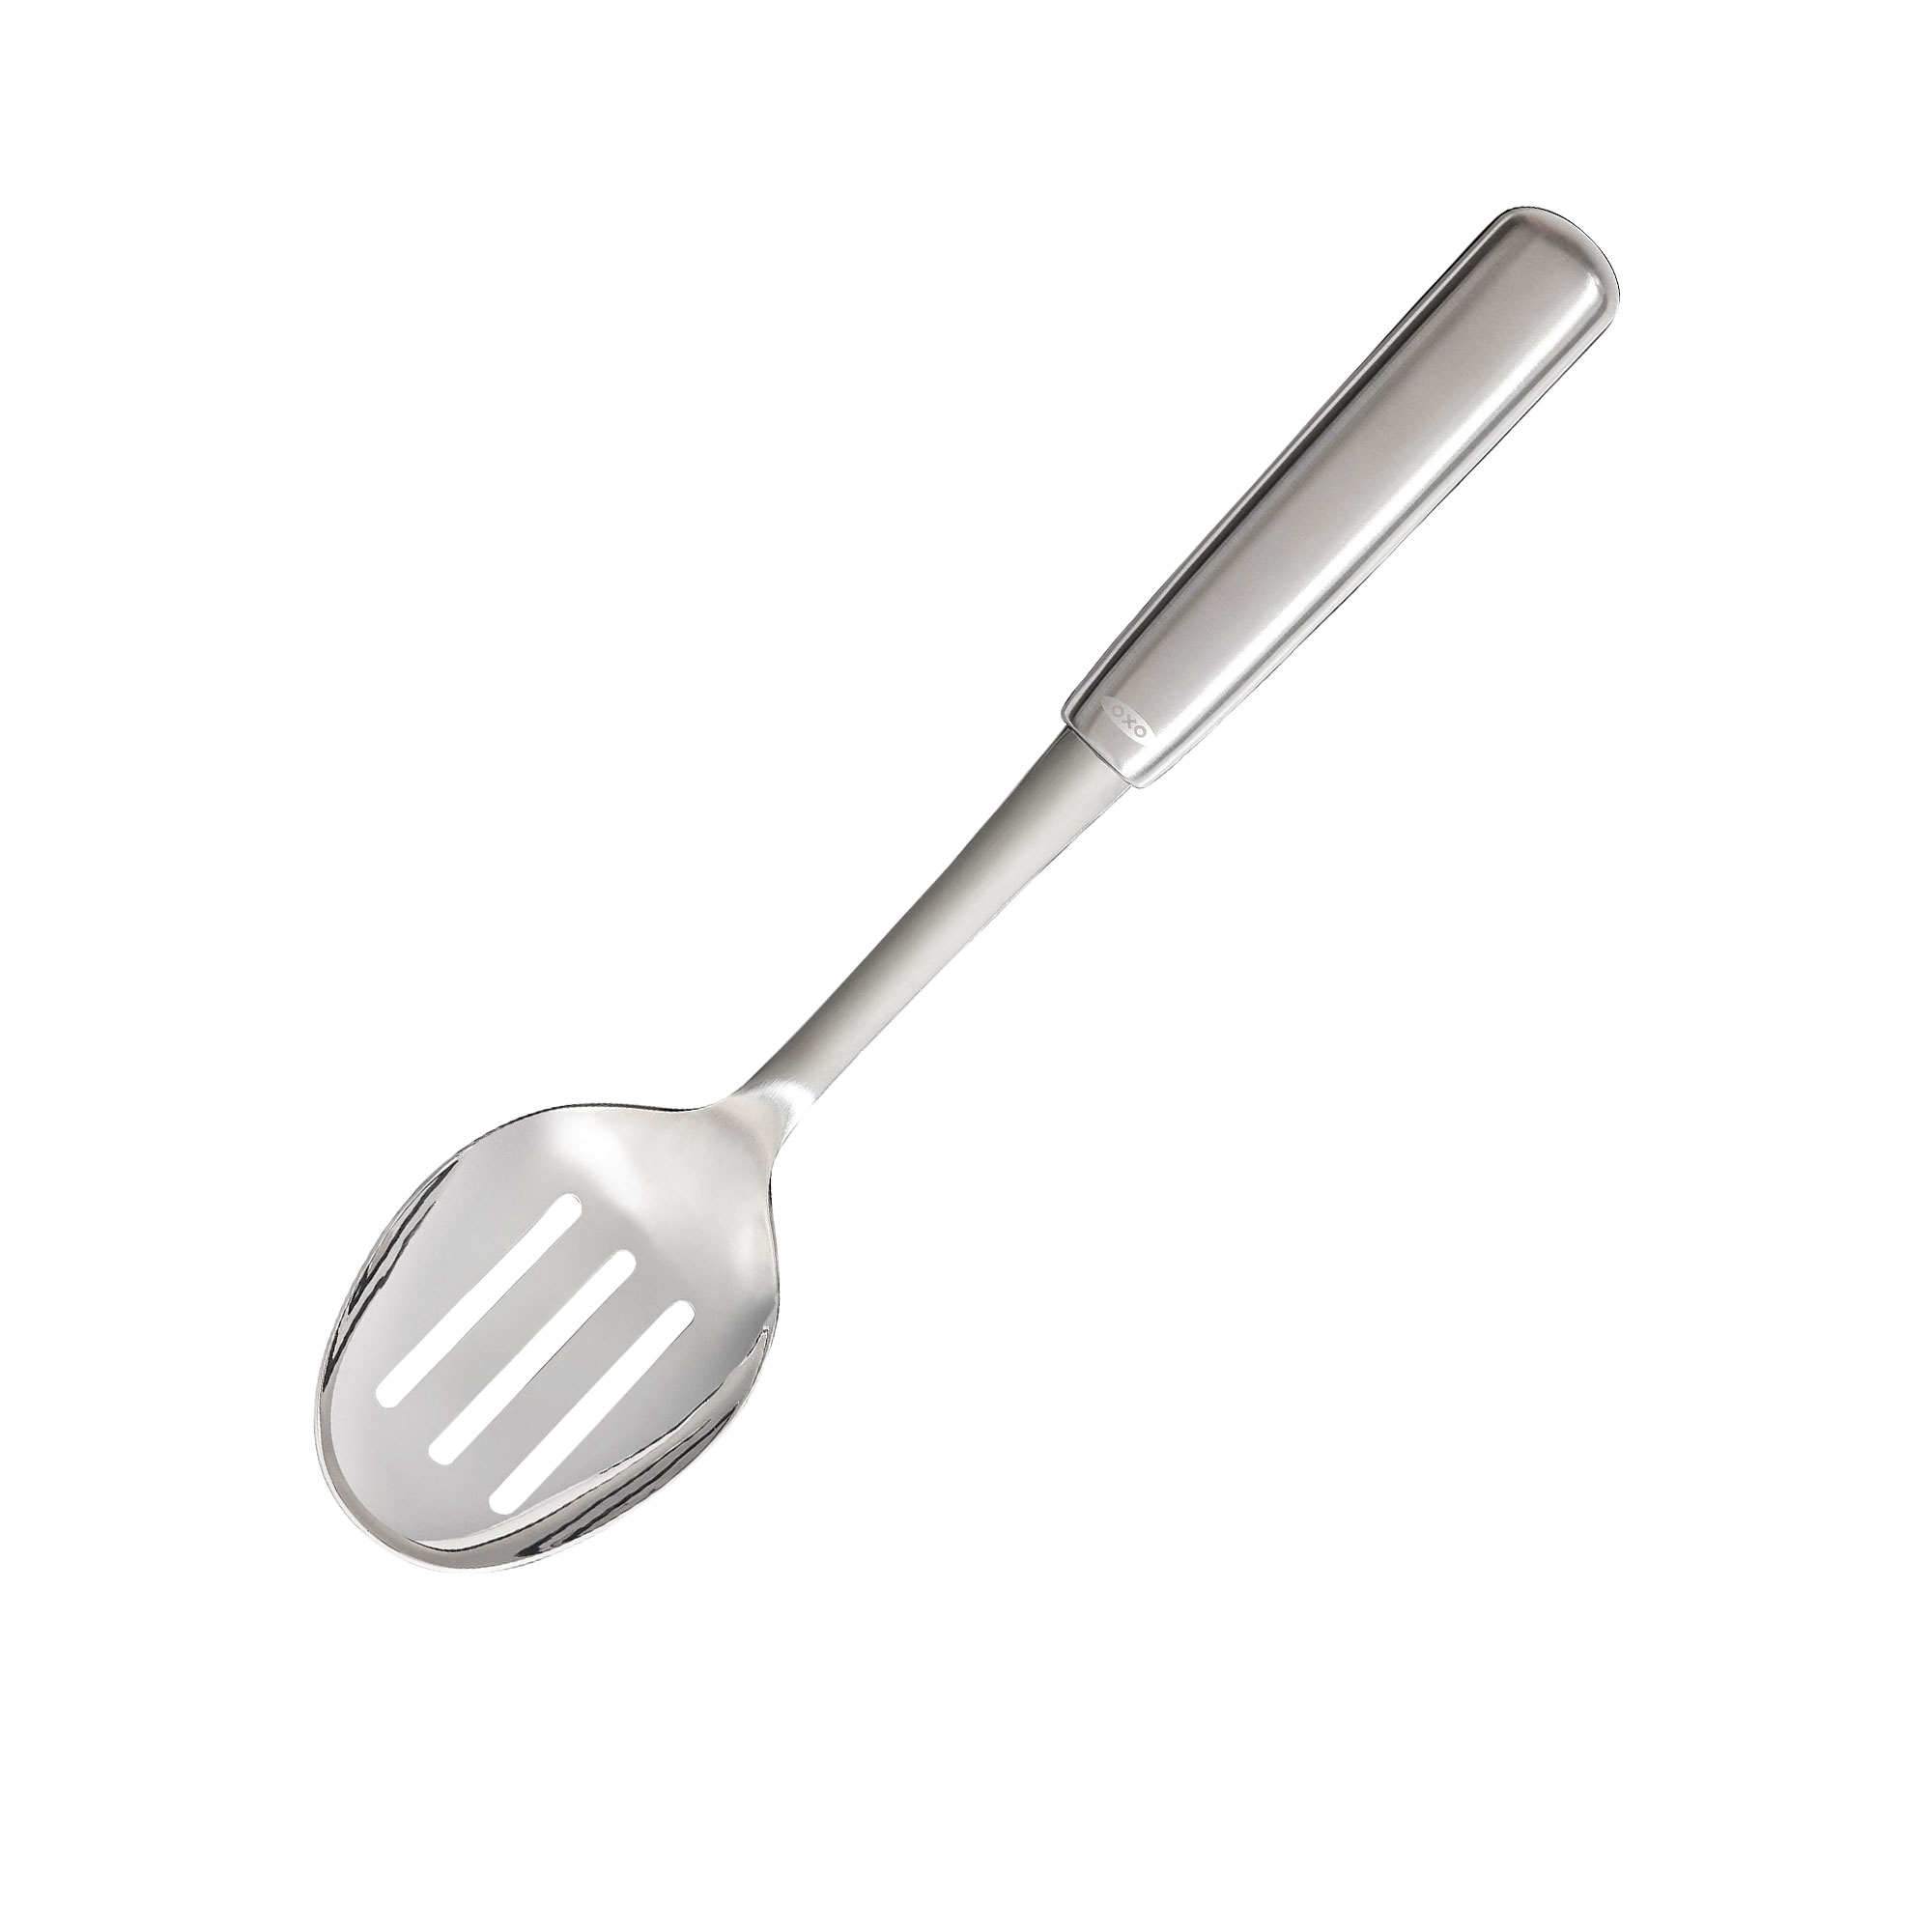 OXO SteeL Slotted Cooking Spoon Image 1